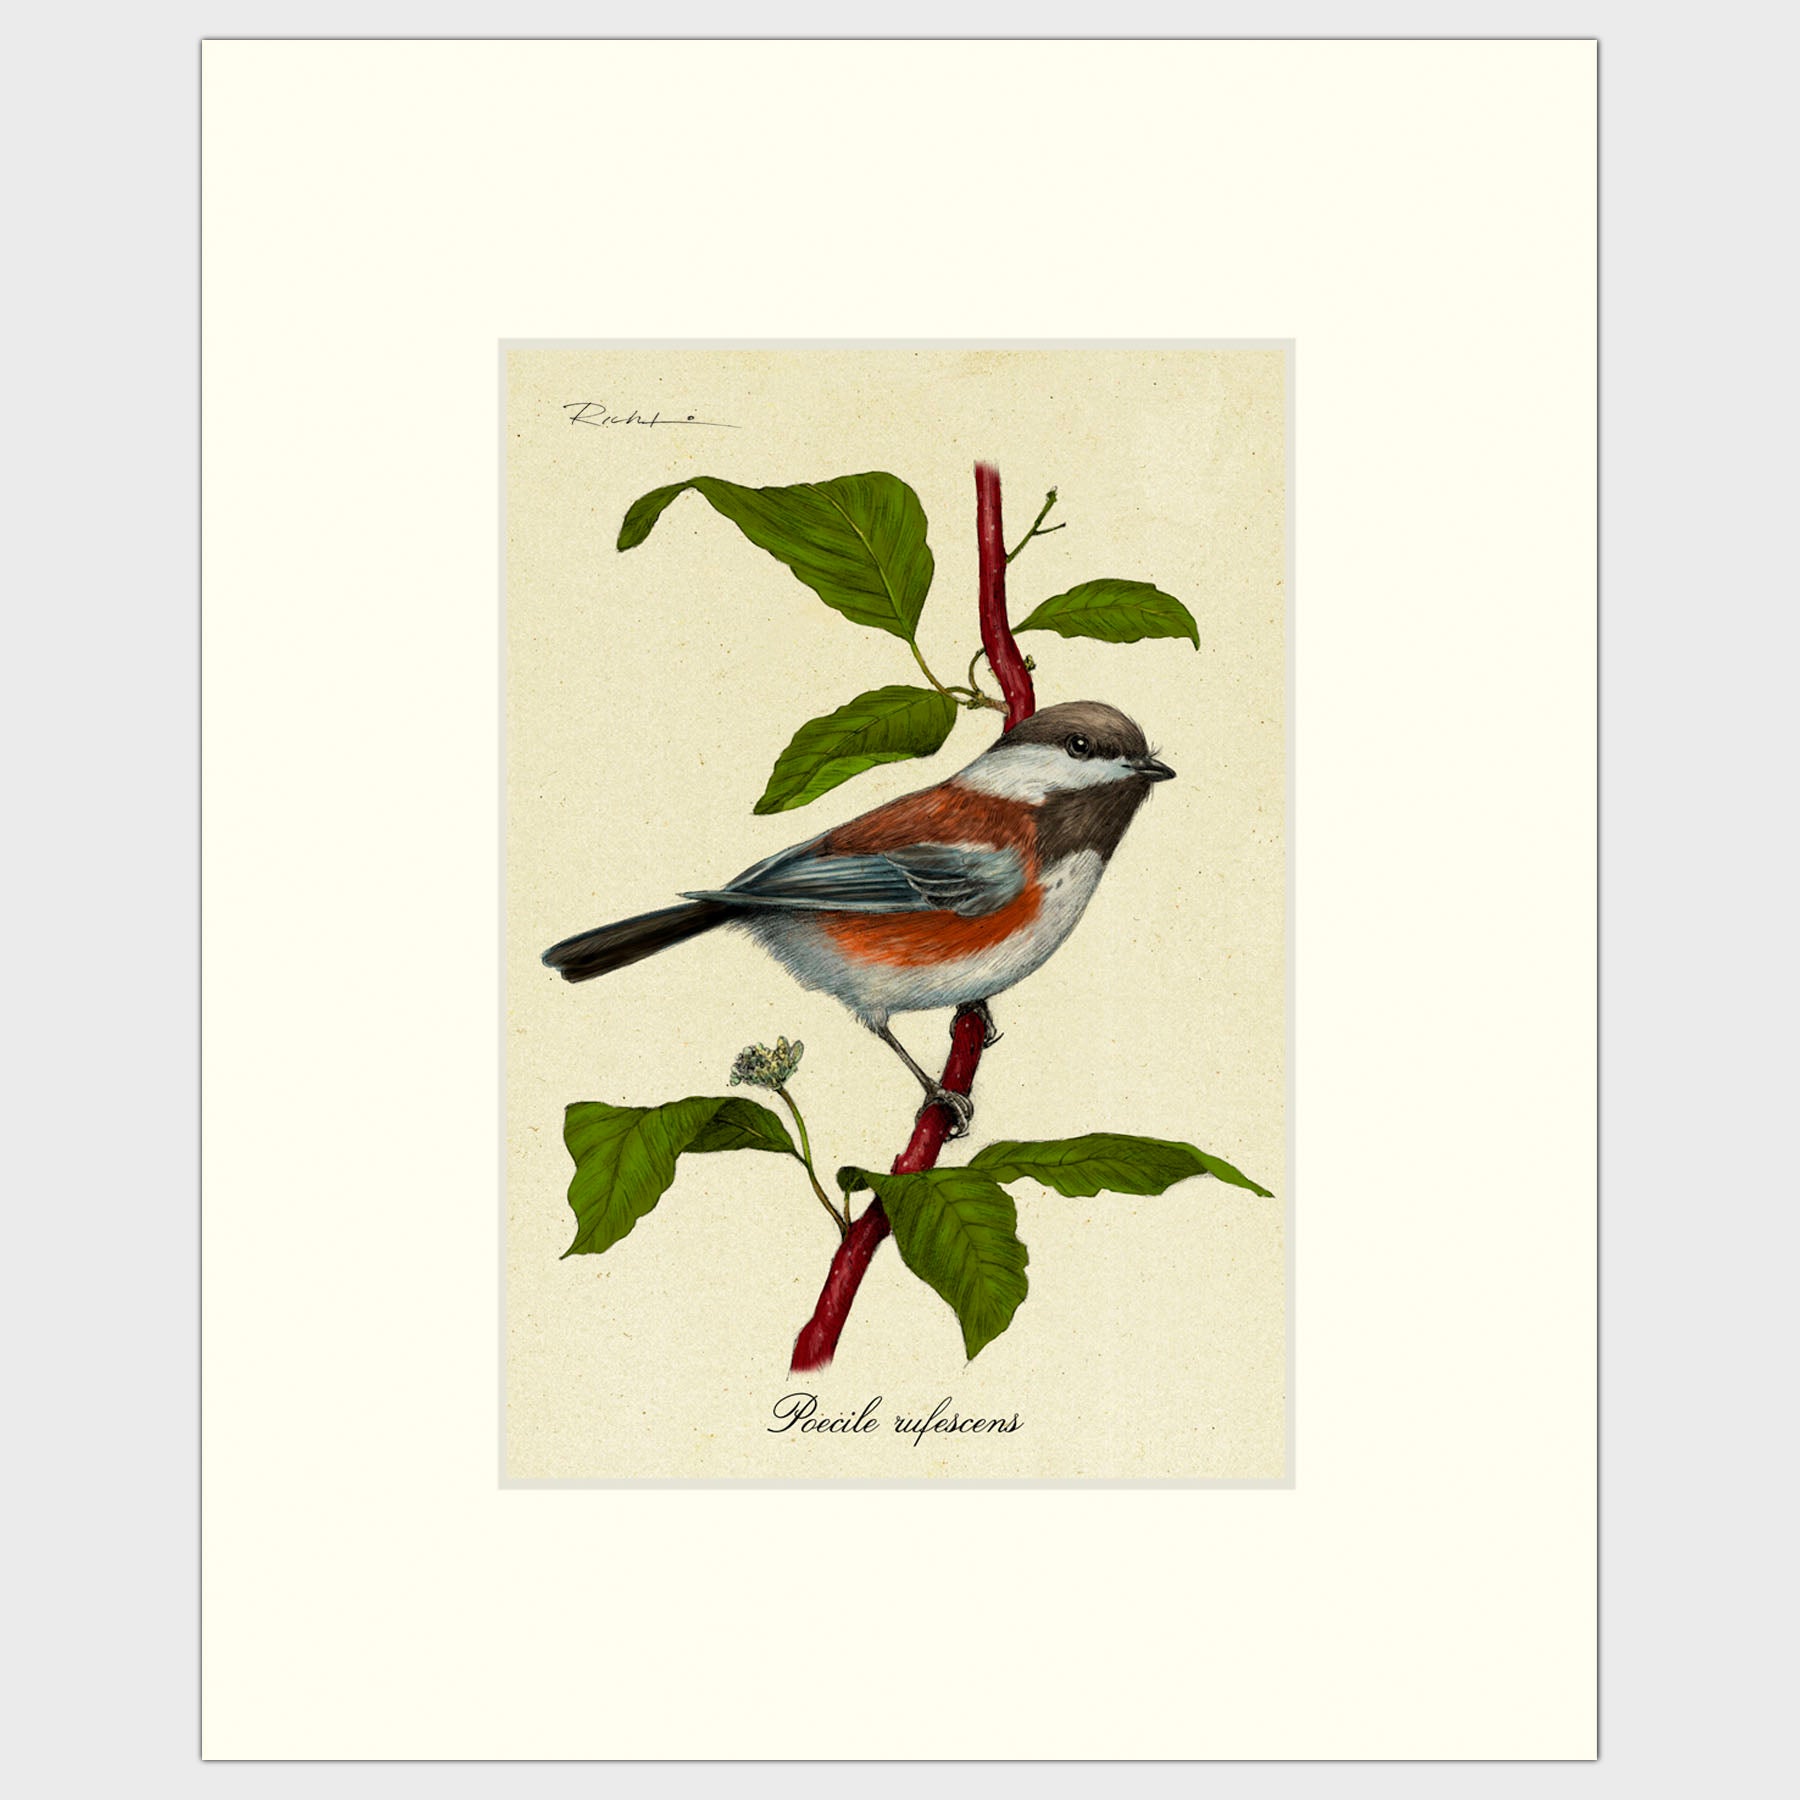 Art prints for sale-Traditional rendering of a chestnut-backed chickadee perched on a dogwood branch